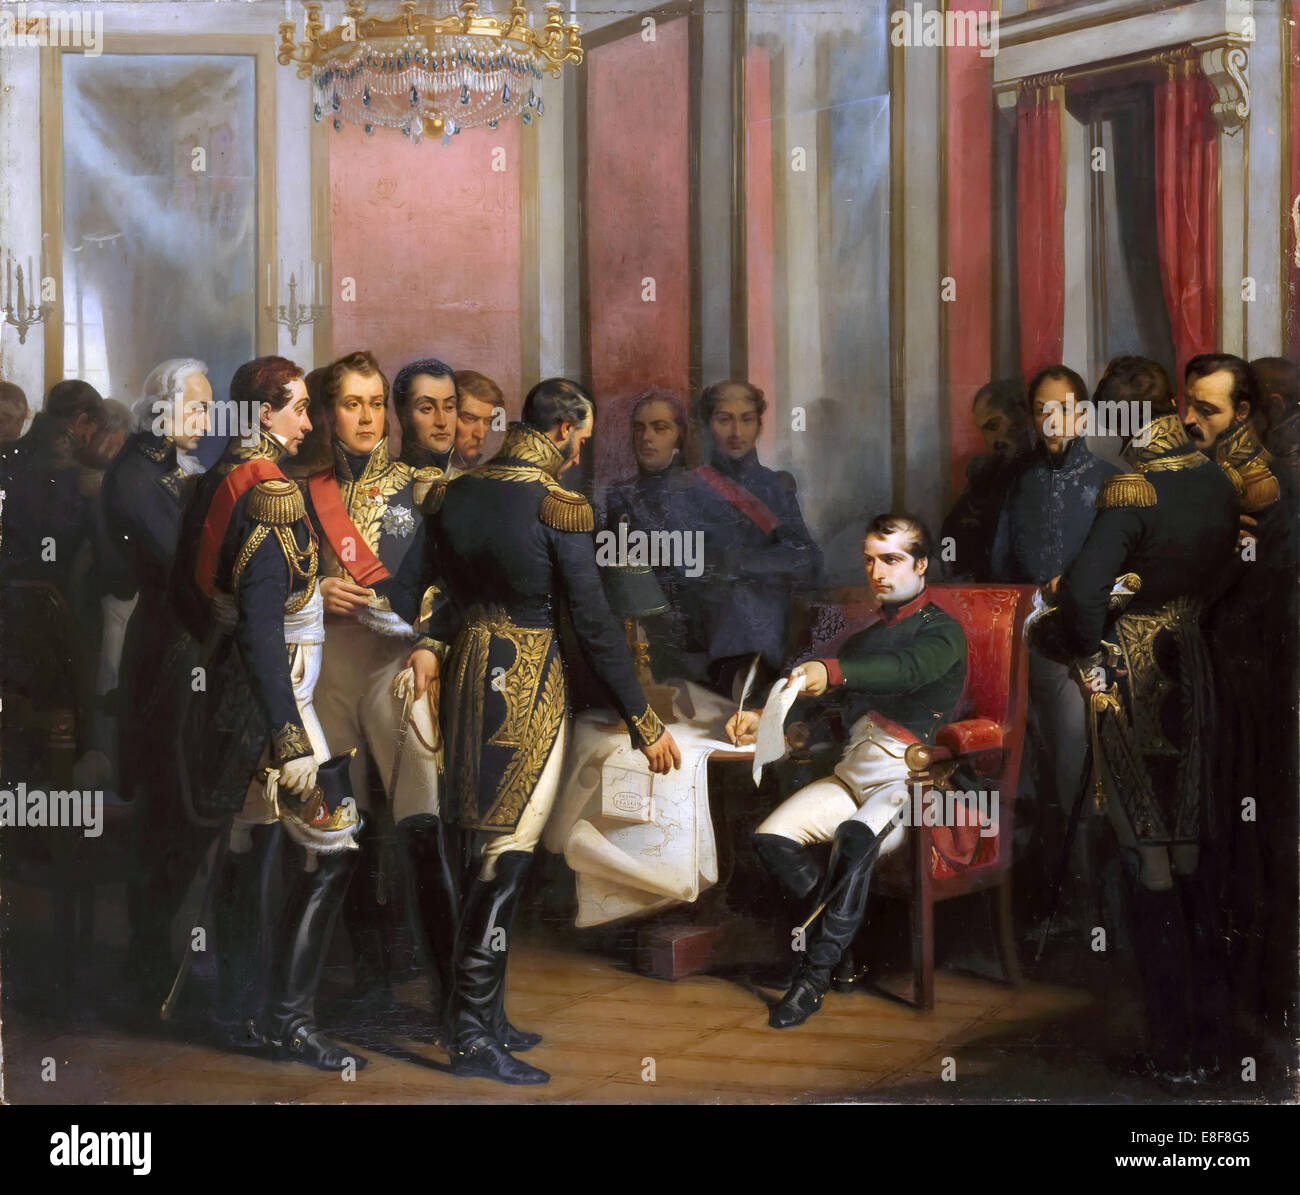 The Abdication of Napoleon at Fontainebleau on 11 April 1814. Artist: Bouchot, François (1800-1842) Stock Photo